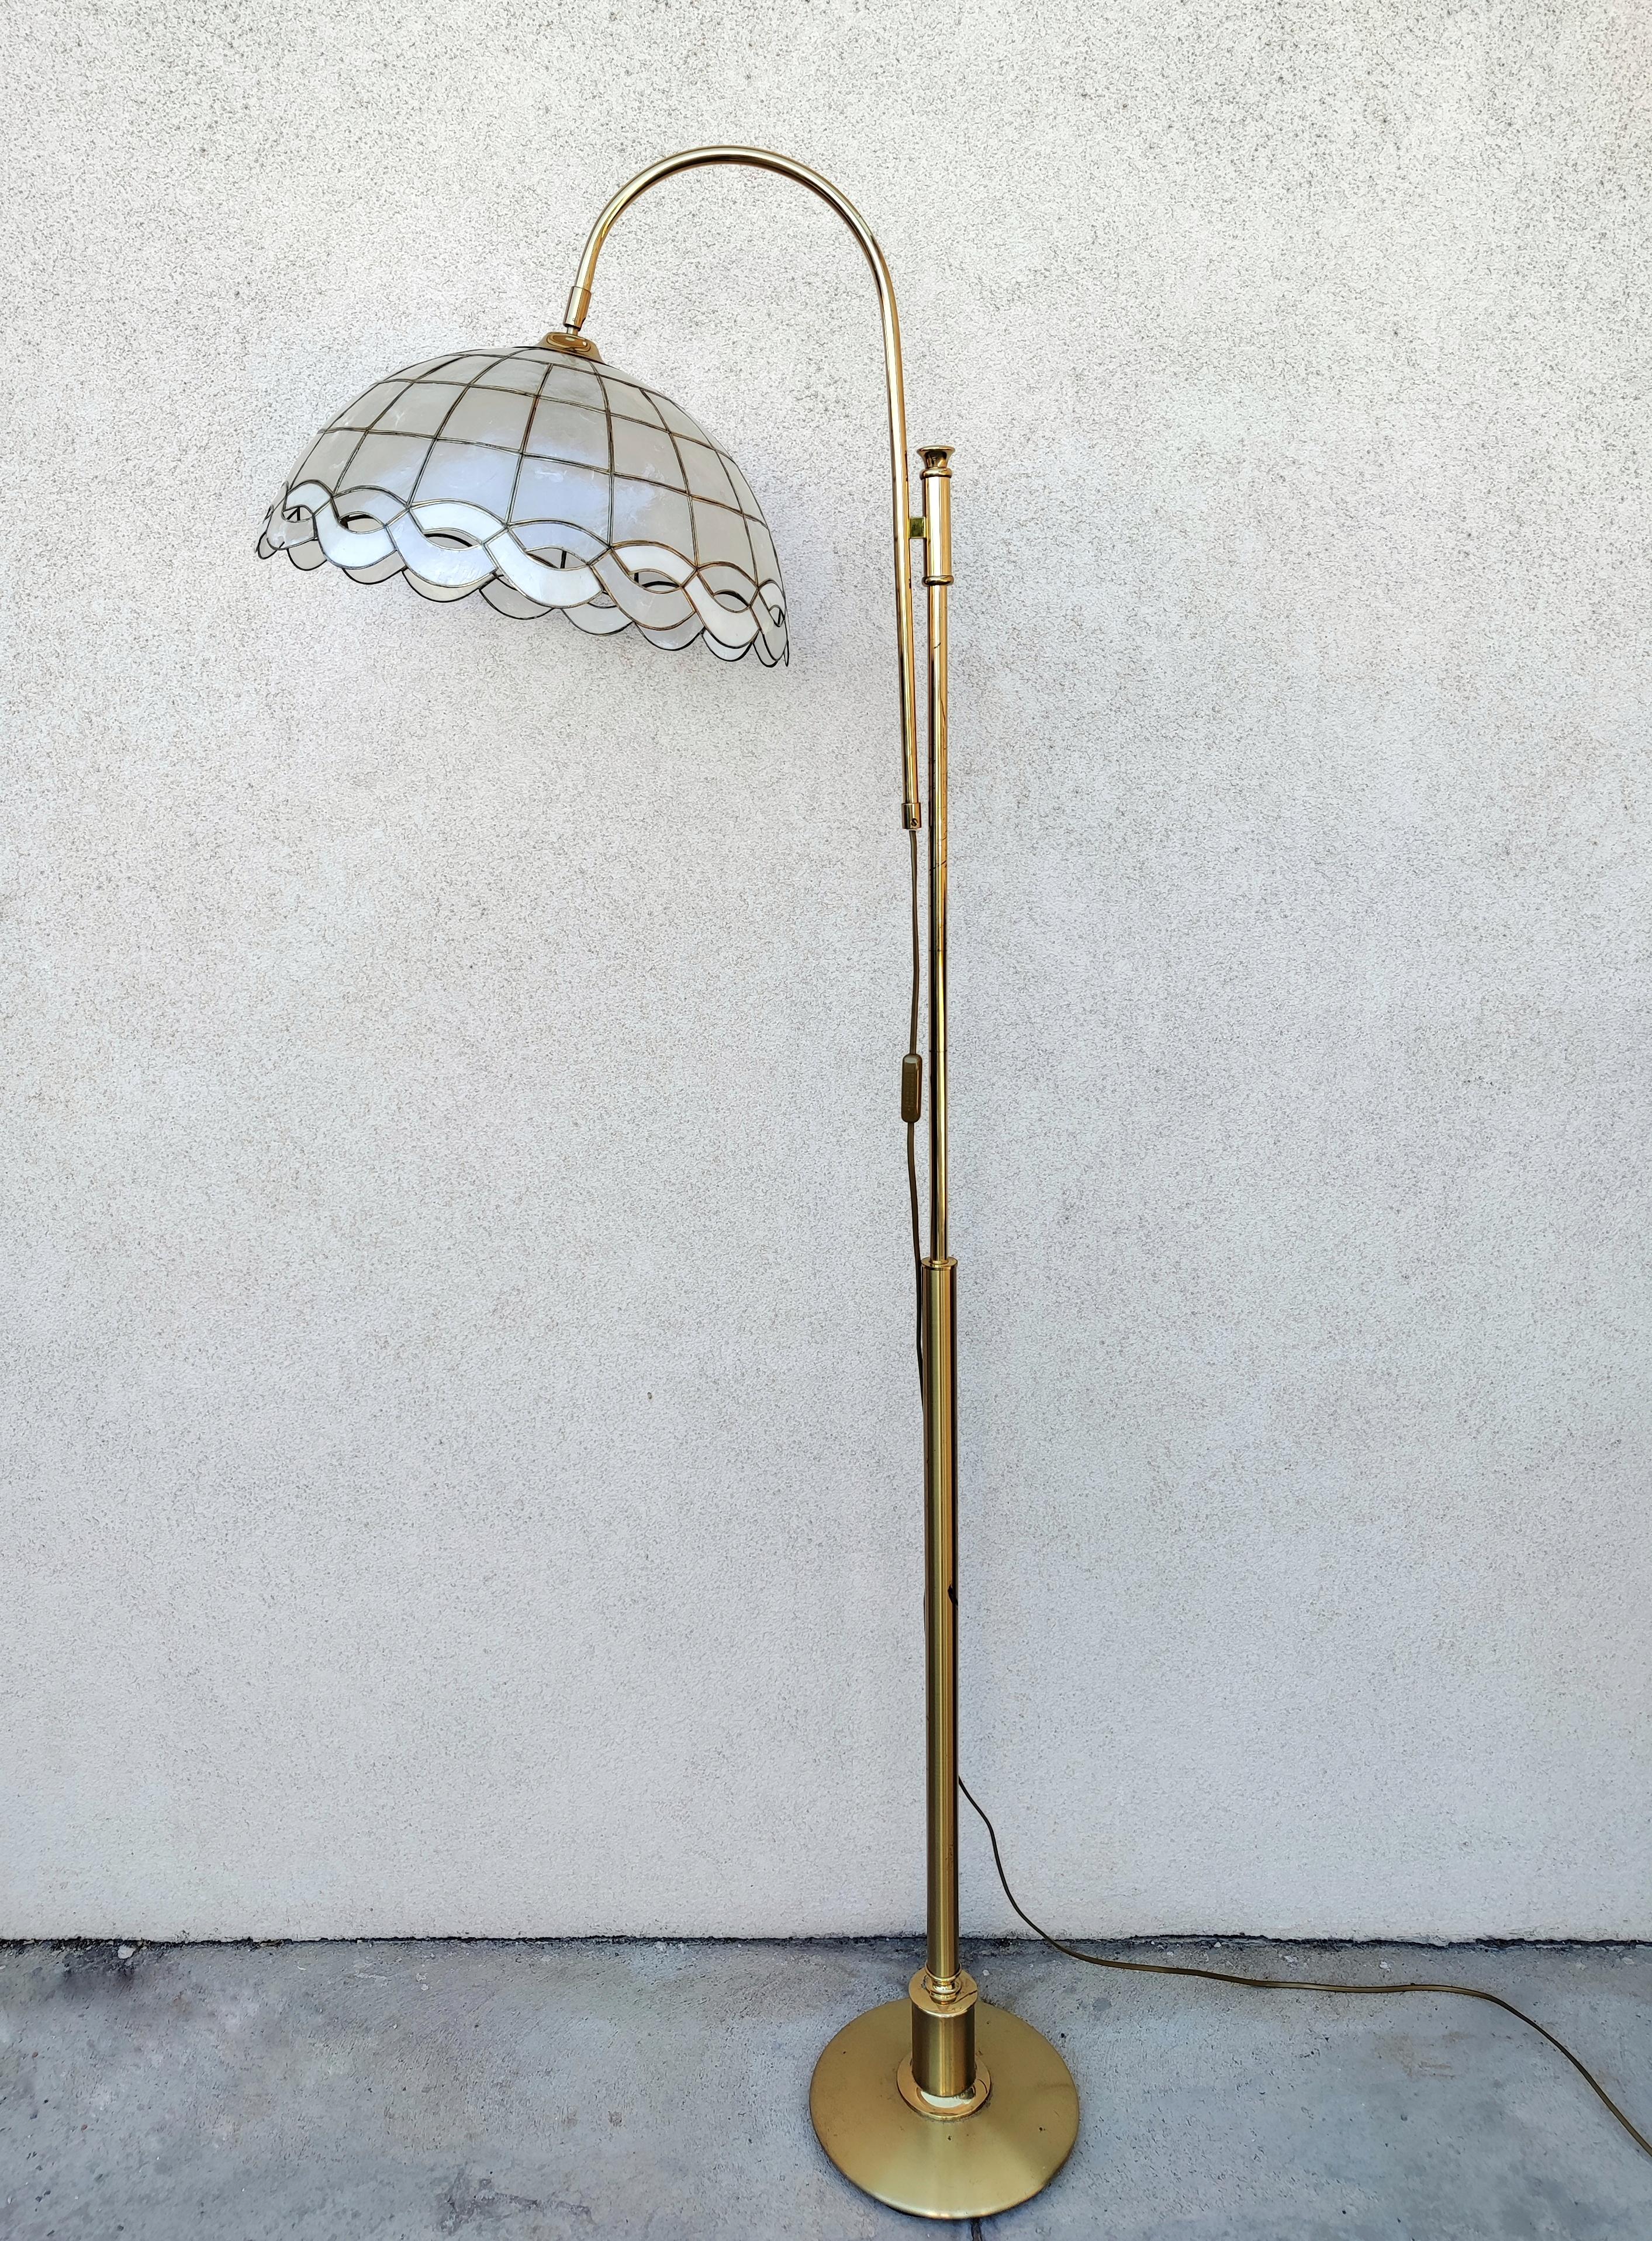 Mid Century Modern Brass Floor Lamp with Capiz Shell Shade, West Germany 1970s For Sale 2